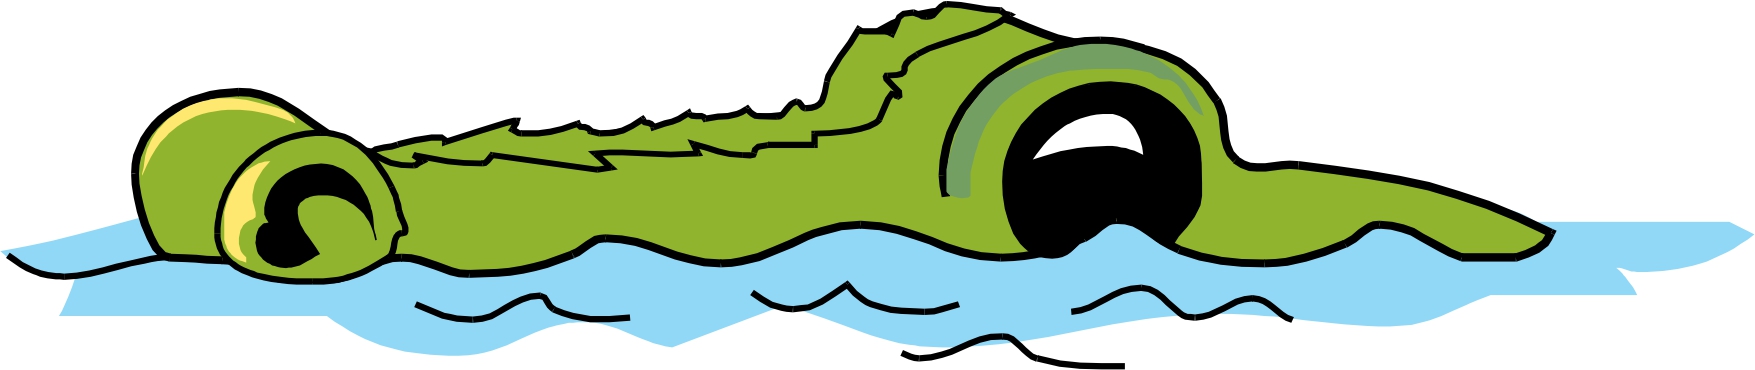 2 gator cartoon. Free cliparts that you can download to you computer and use in your designs.